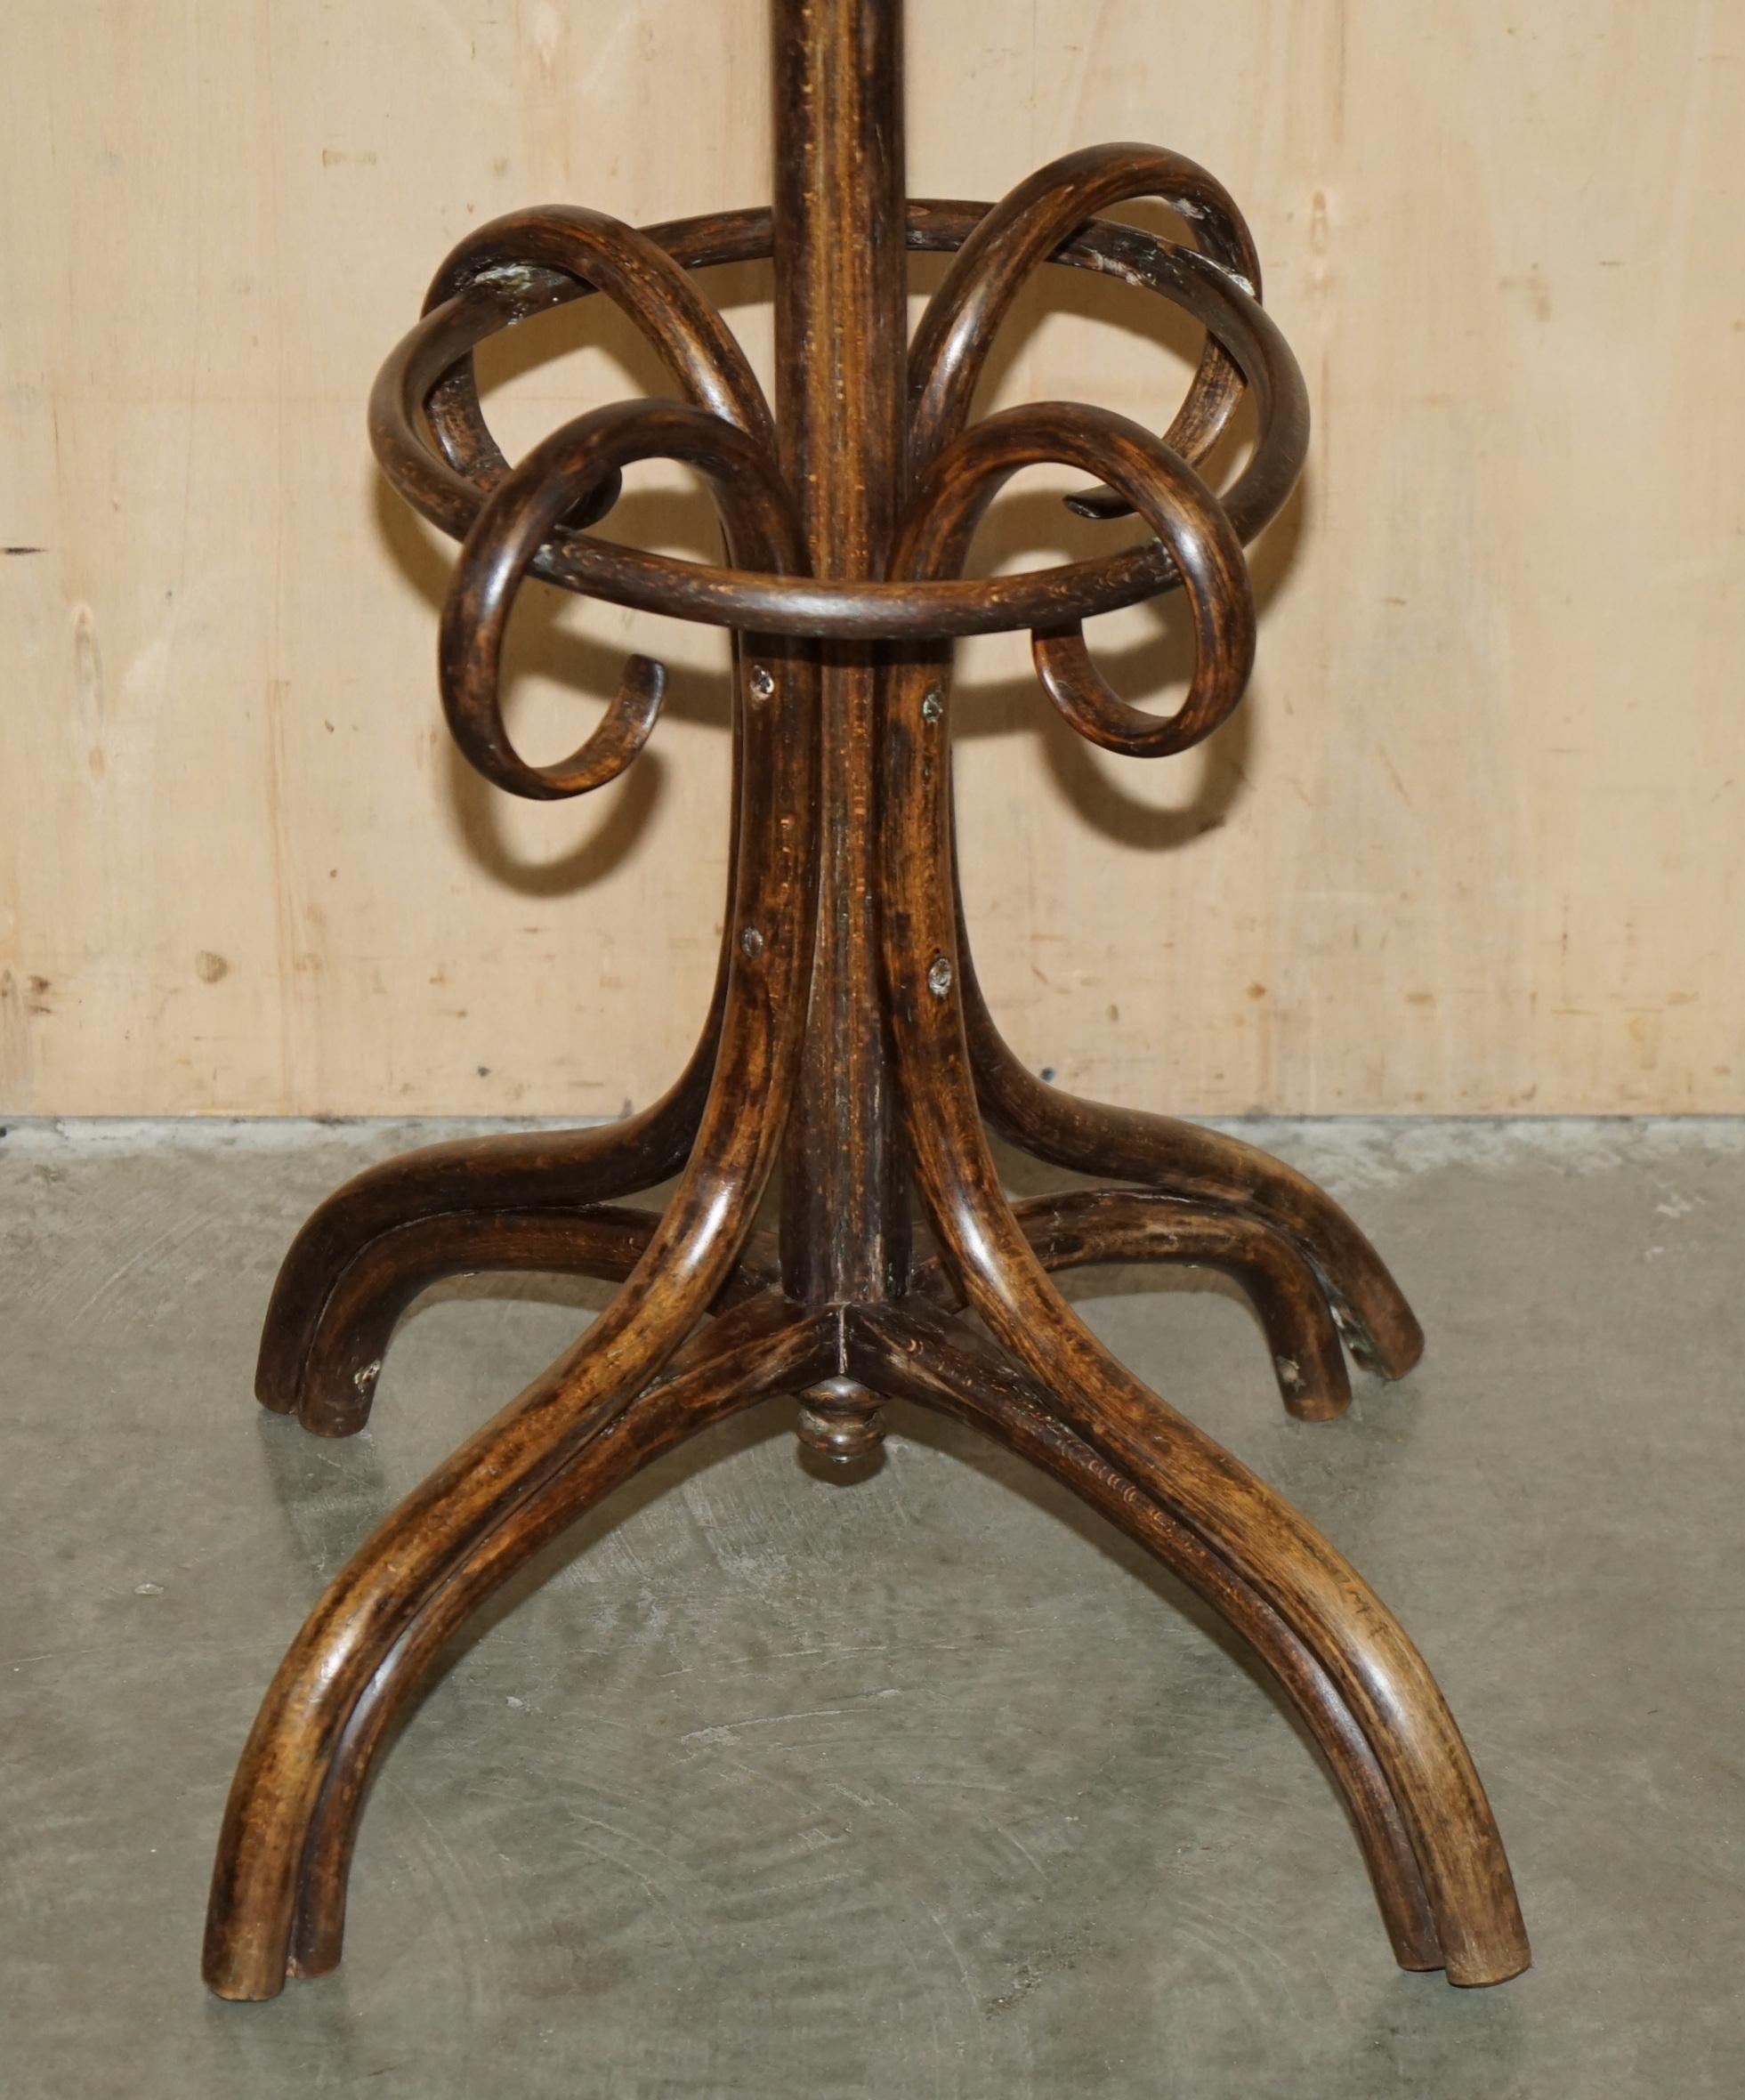 Royal House Antiques

Royal House Antiques is delighted to offer for sale this lovely antique circa 1880-1900 Austrian Thonet bentwood coat rack 

Please note the delivery fee listed is just a guide, it covers within the M25 only for the UK and